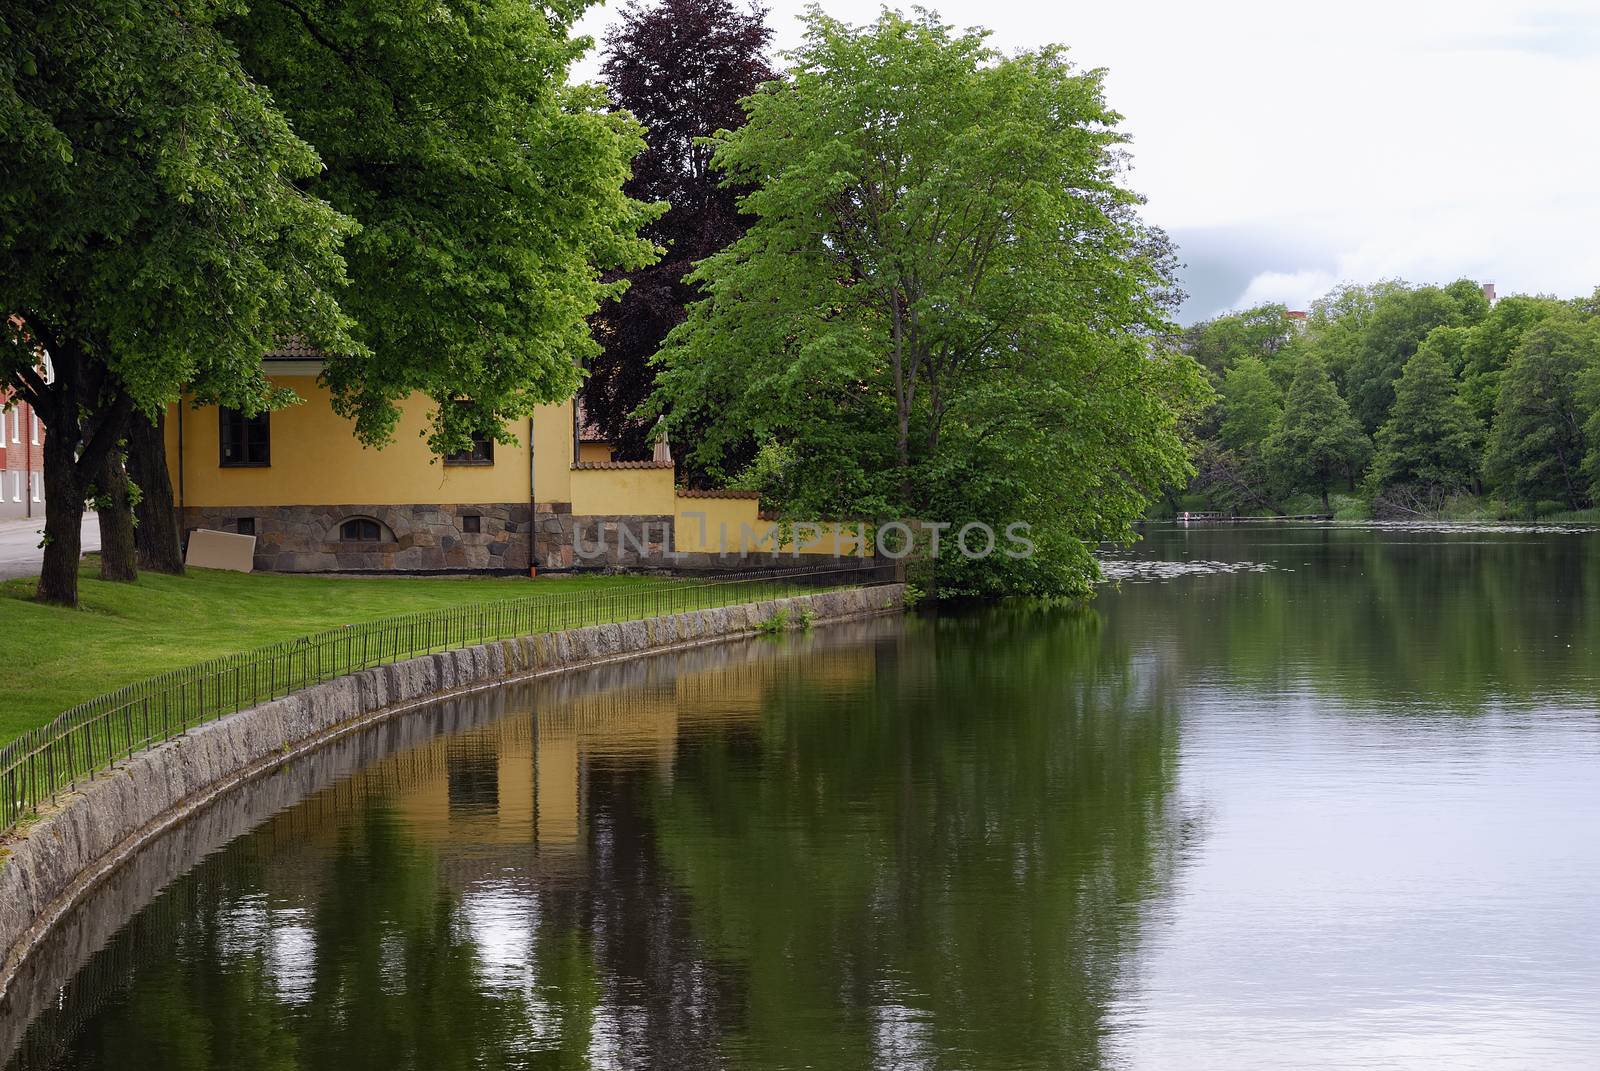 House by the river in Eskilstuna - Sweden.